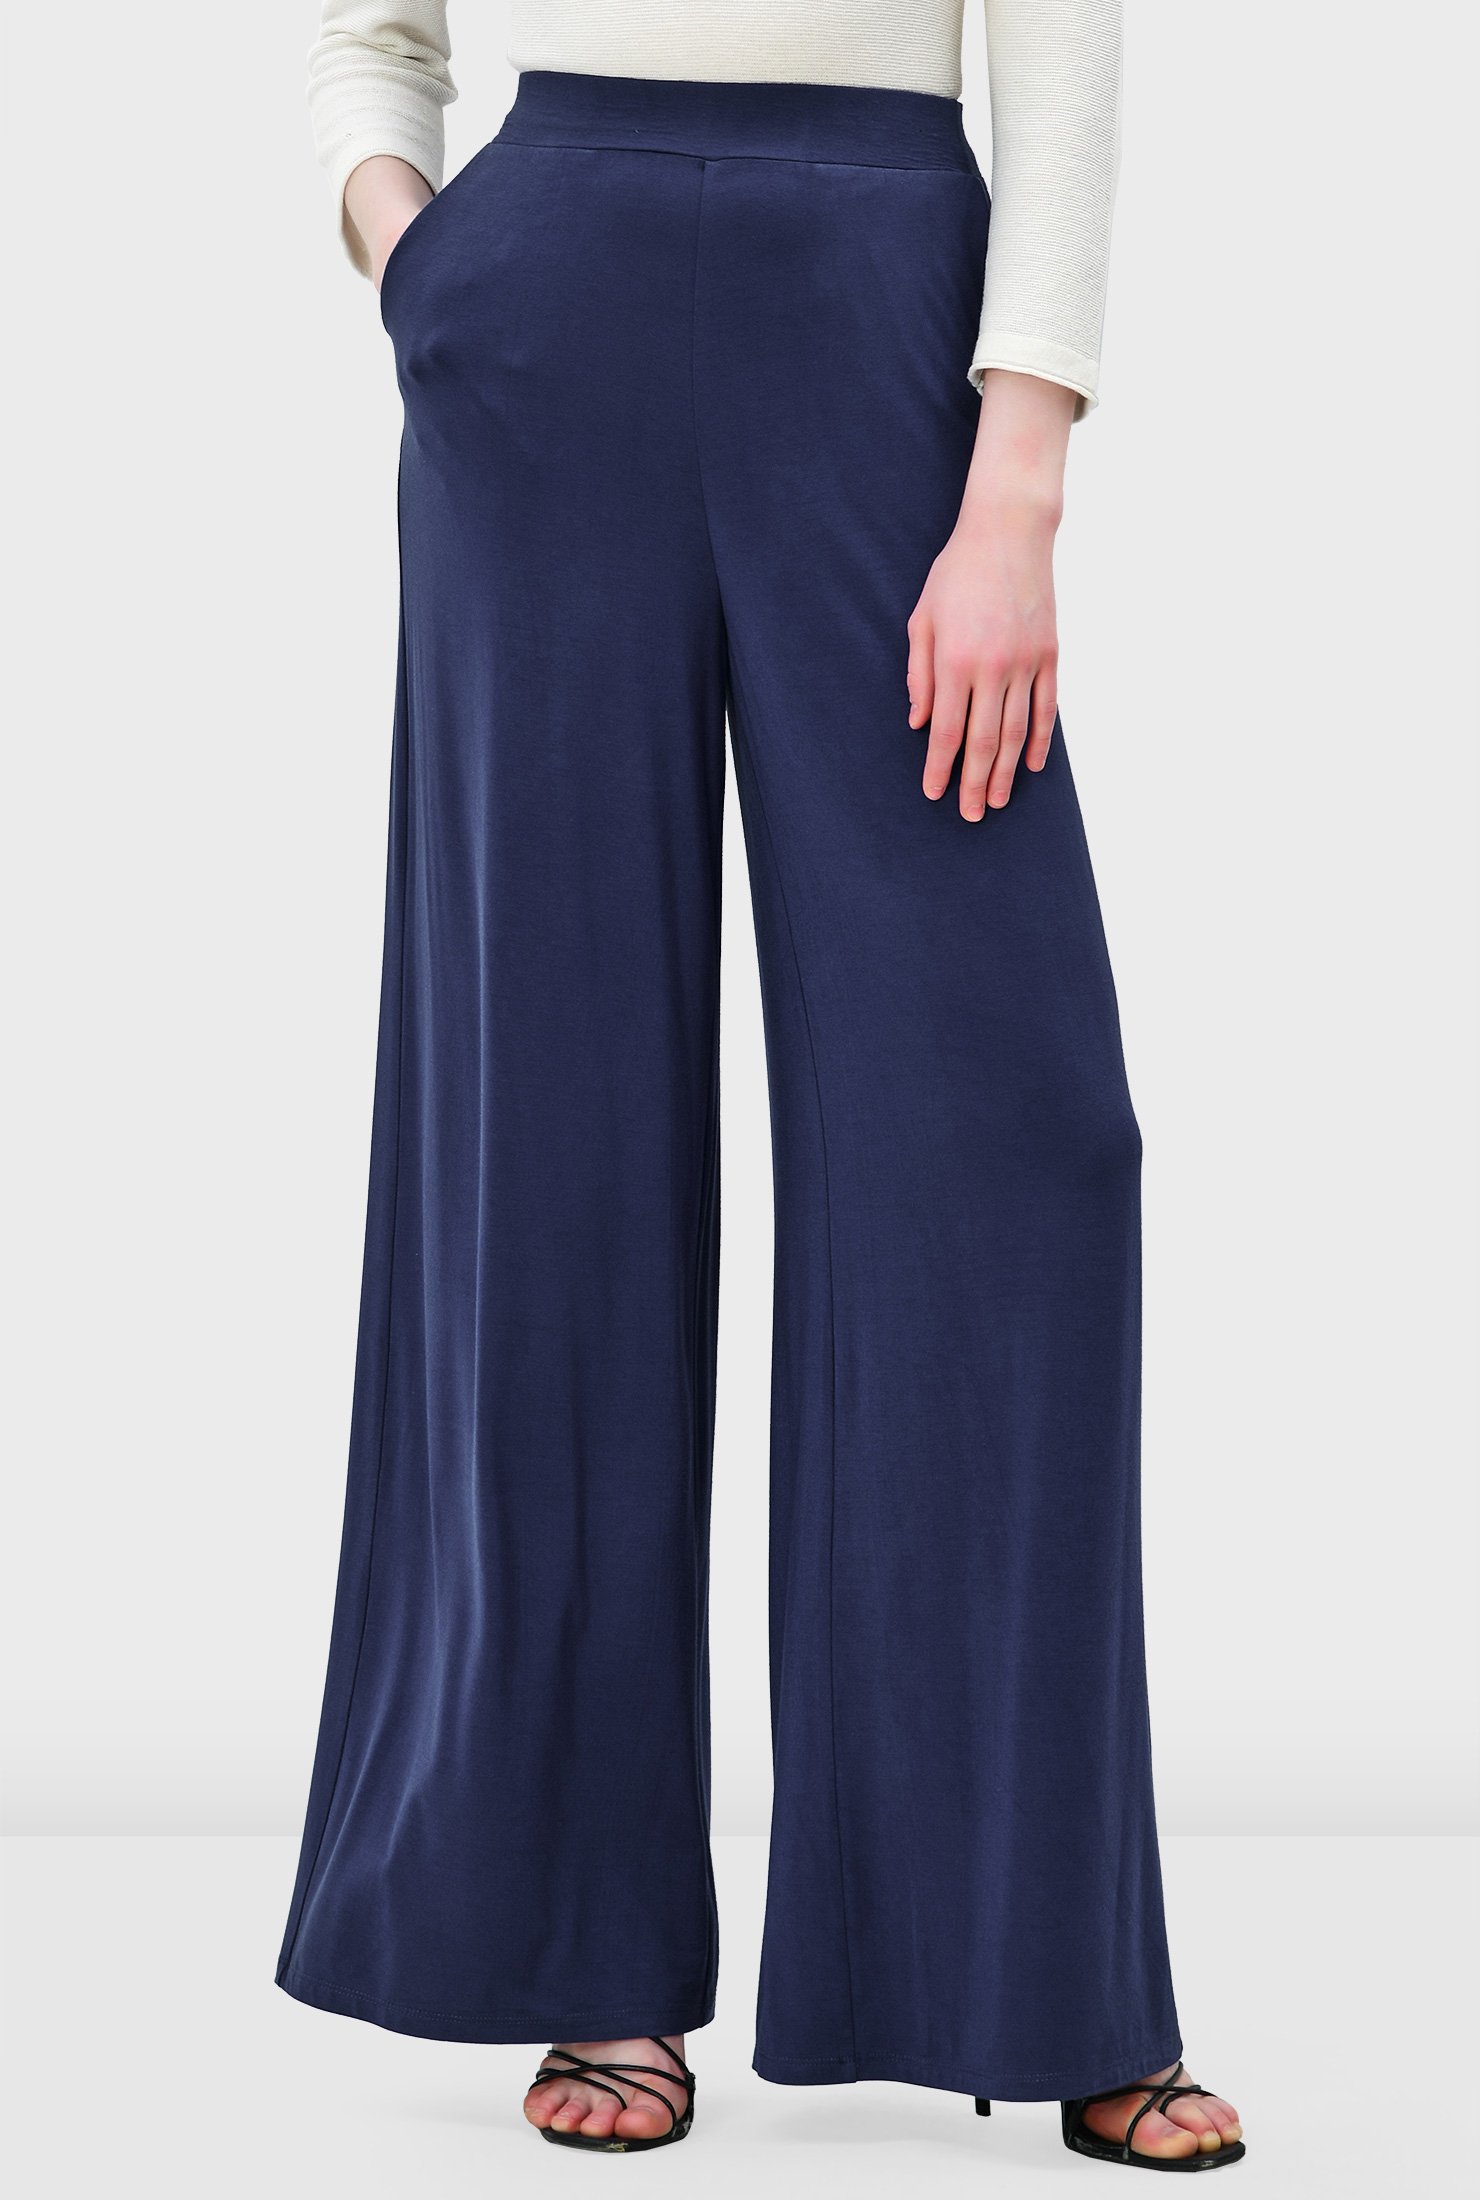 Blue Palazzos - Buy Trendy Blue Palazzos Online in India | Myntra